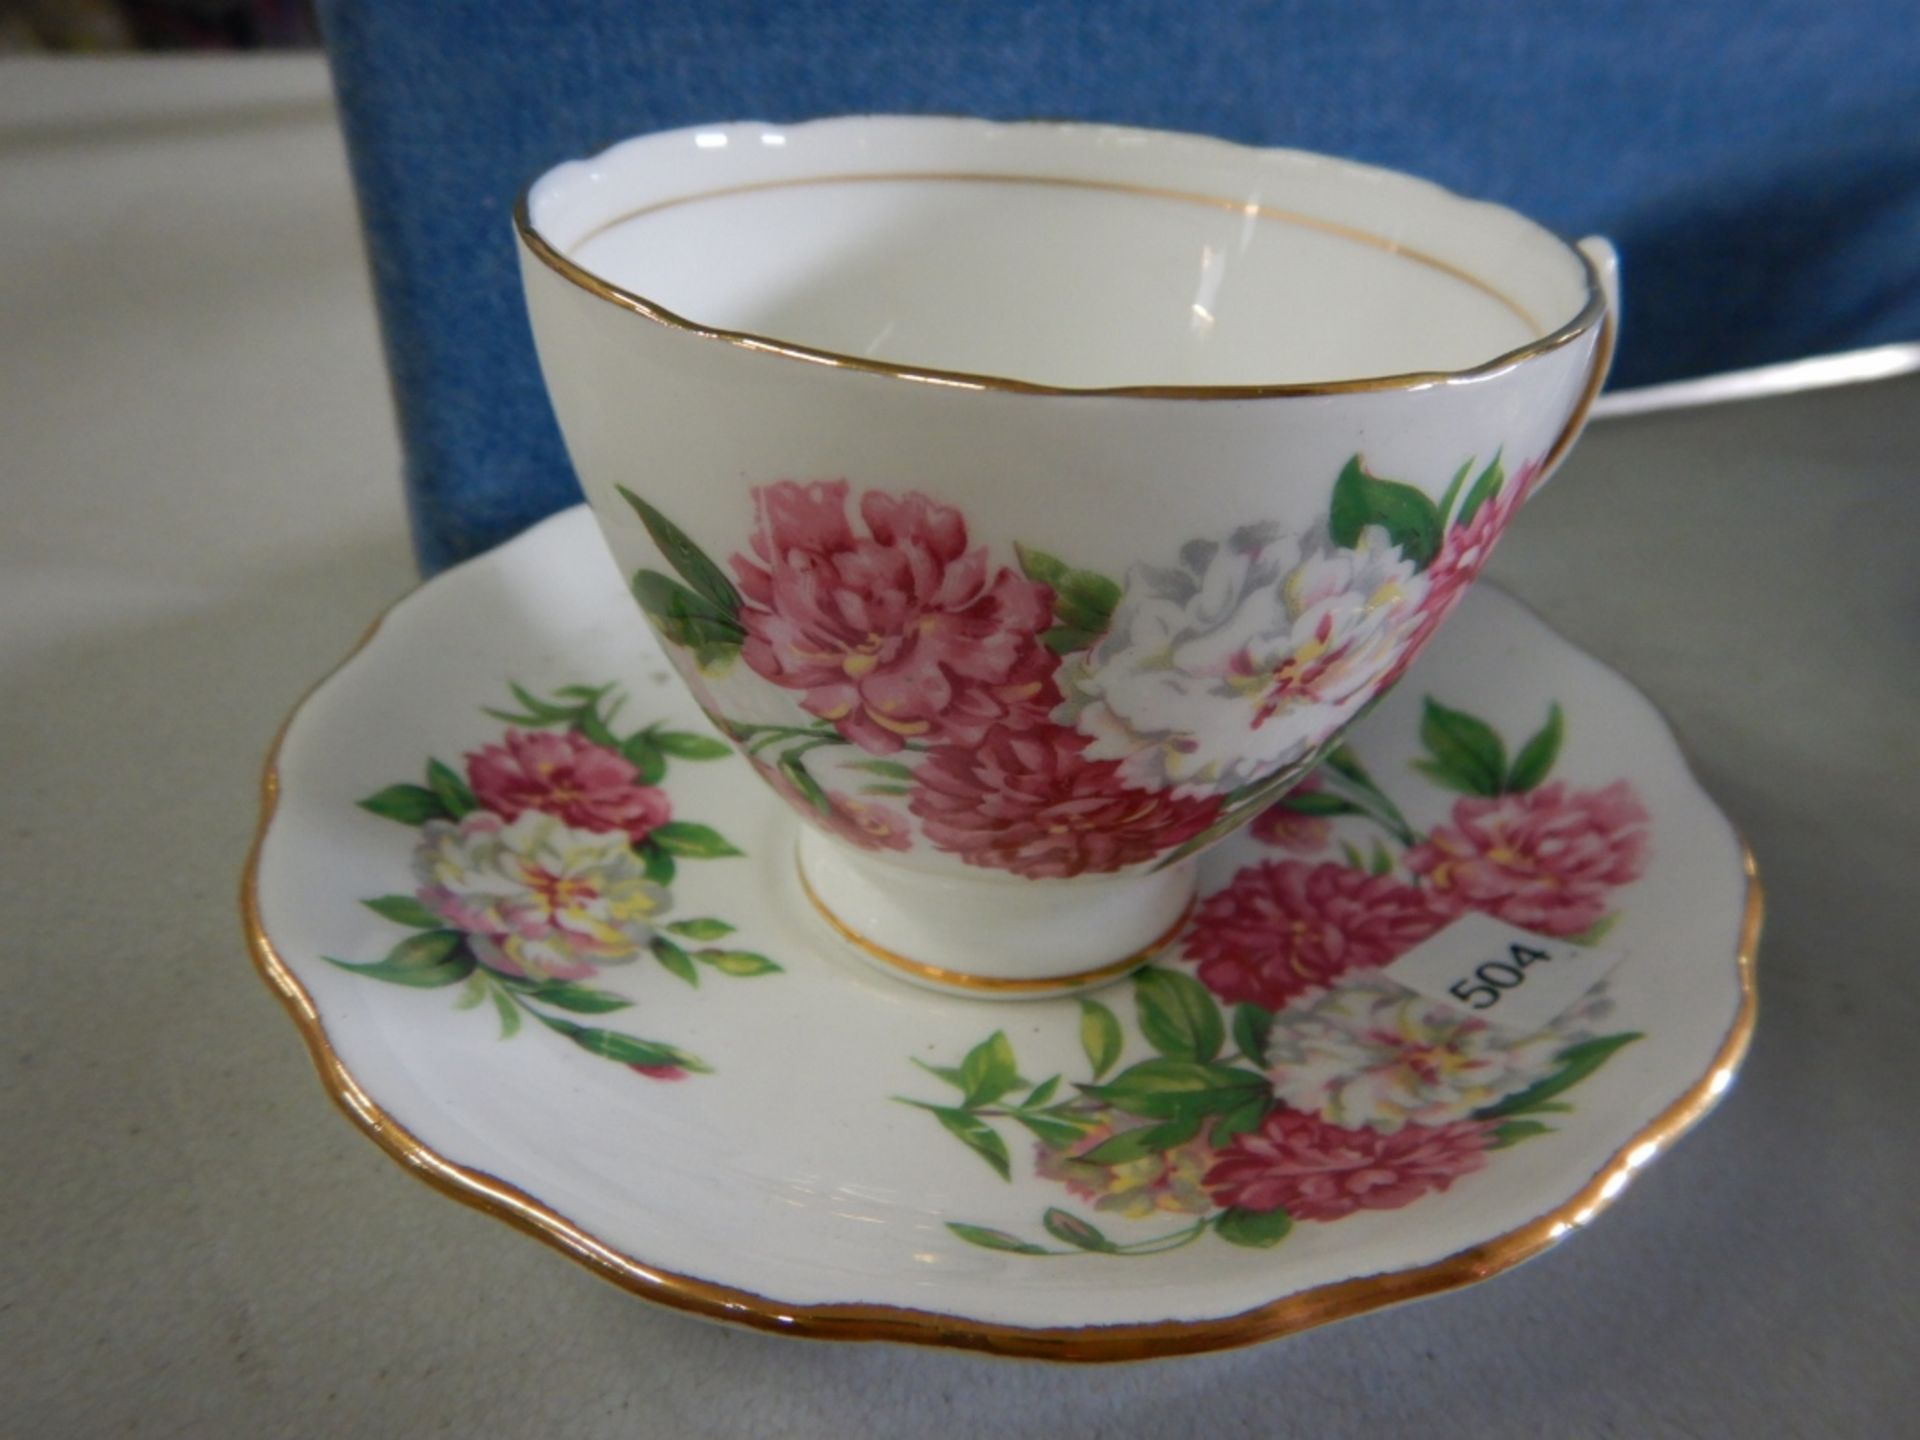 ANTIQUE TEACUPS & SAUCERS - MADE IN ENGLAND - LOT OF 7 - BONE CHINA #8273 - YELLOW FLOWERS, # - Image 3 of 33